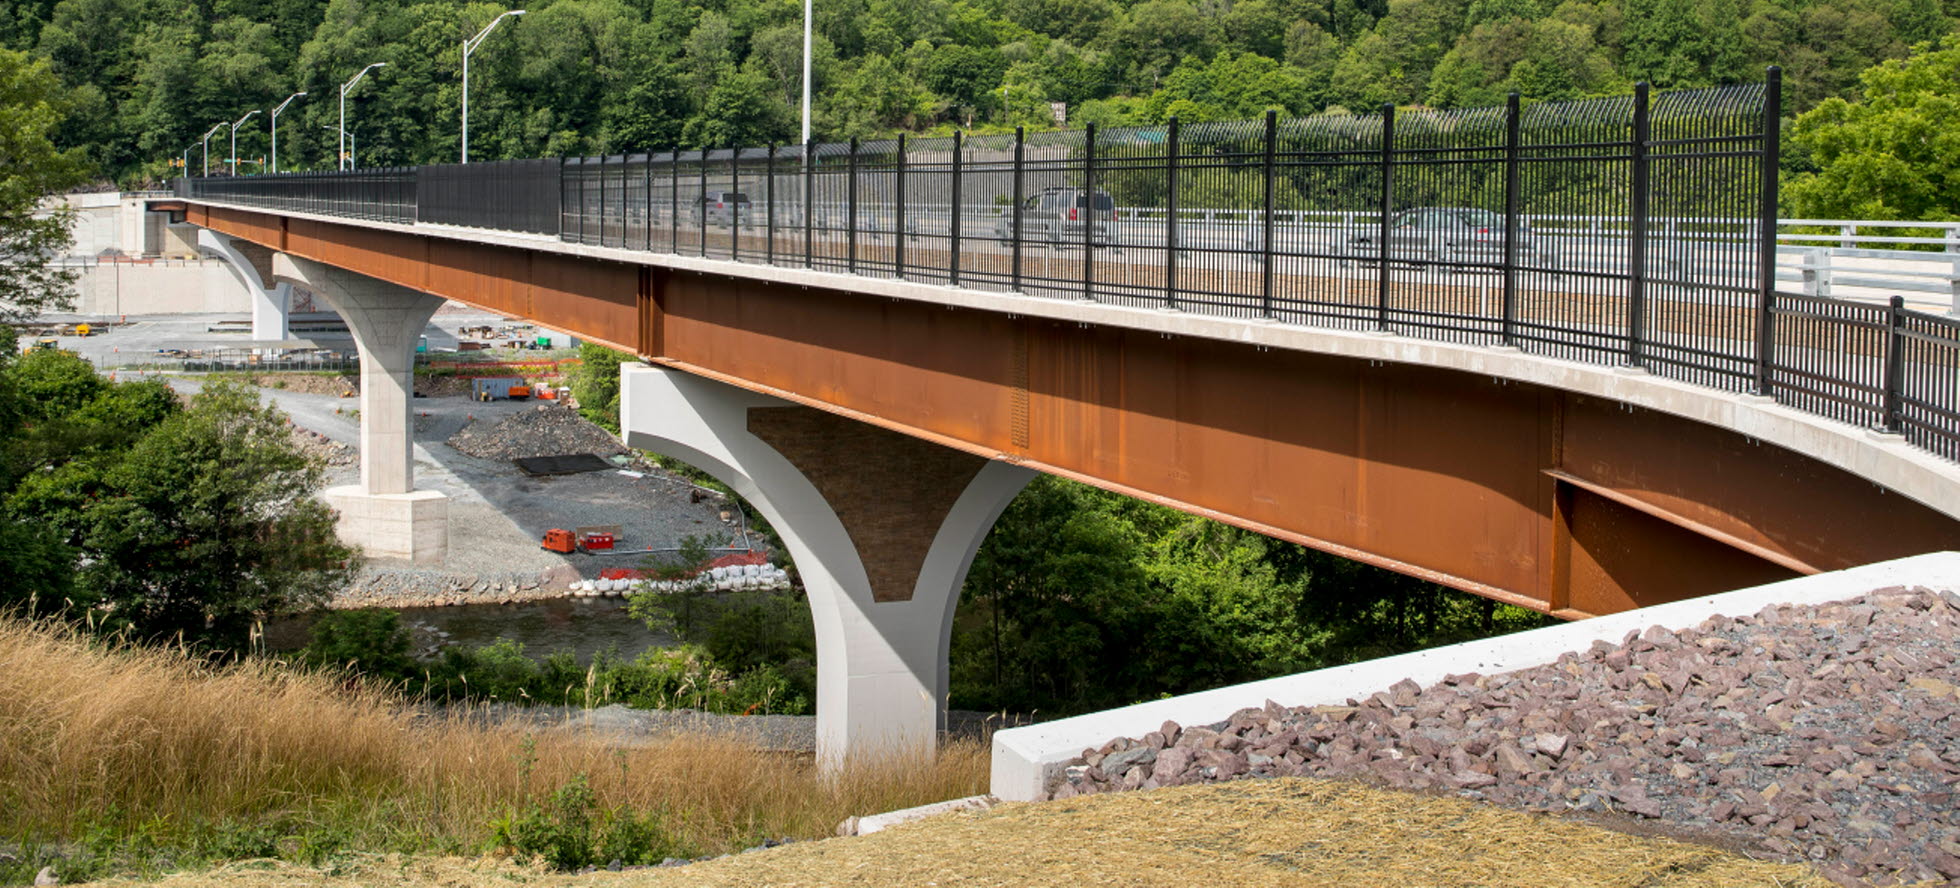 The structural steel for the Jim Thorpe Memorial Bridge was fabricated by High Steel Structures.